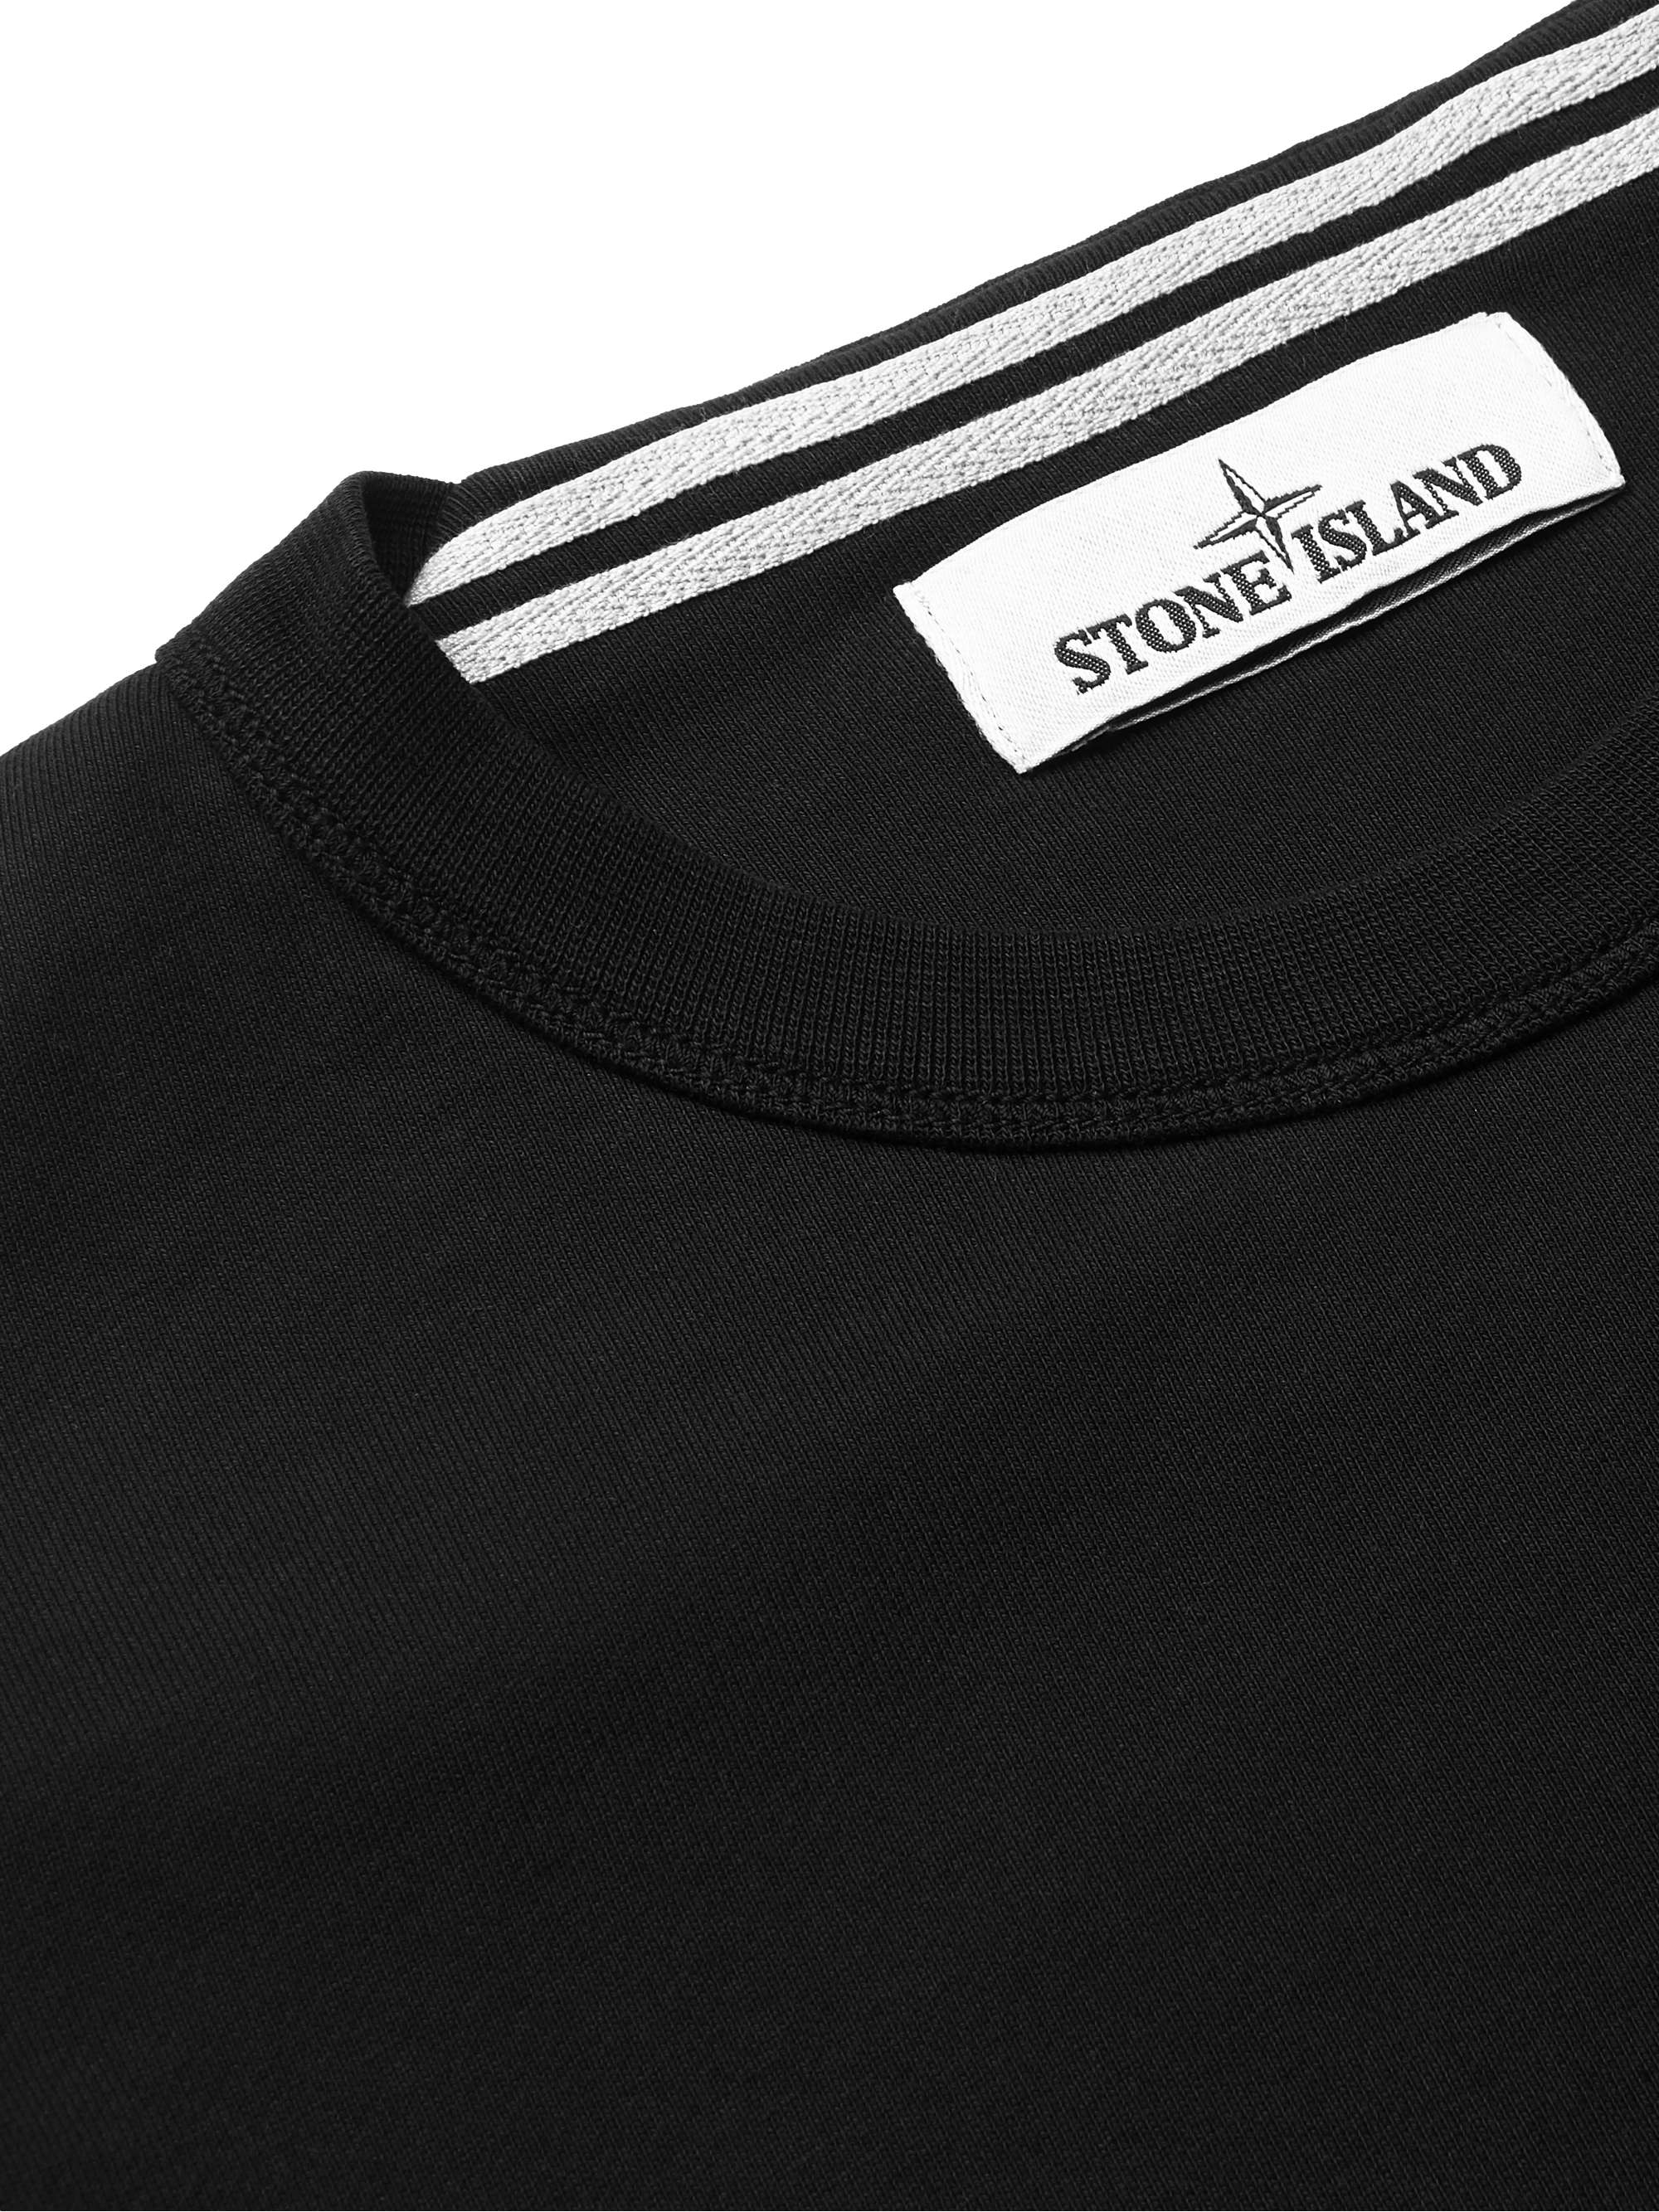 STONE ISLAND Logo-Embroidered Garment-Dyed Loopback Cotton-Jersey ...